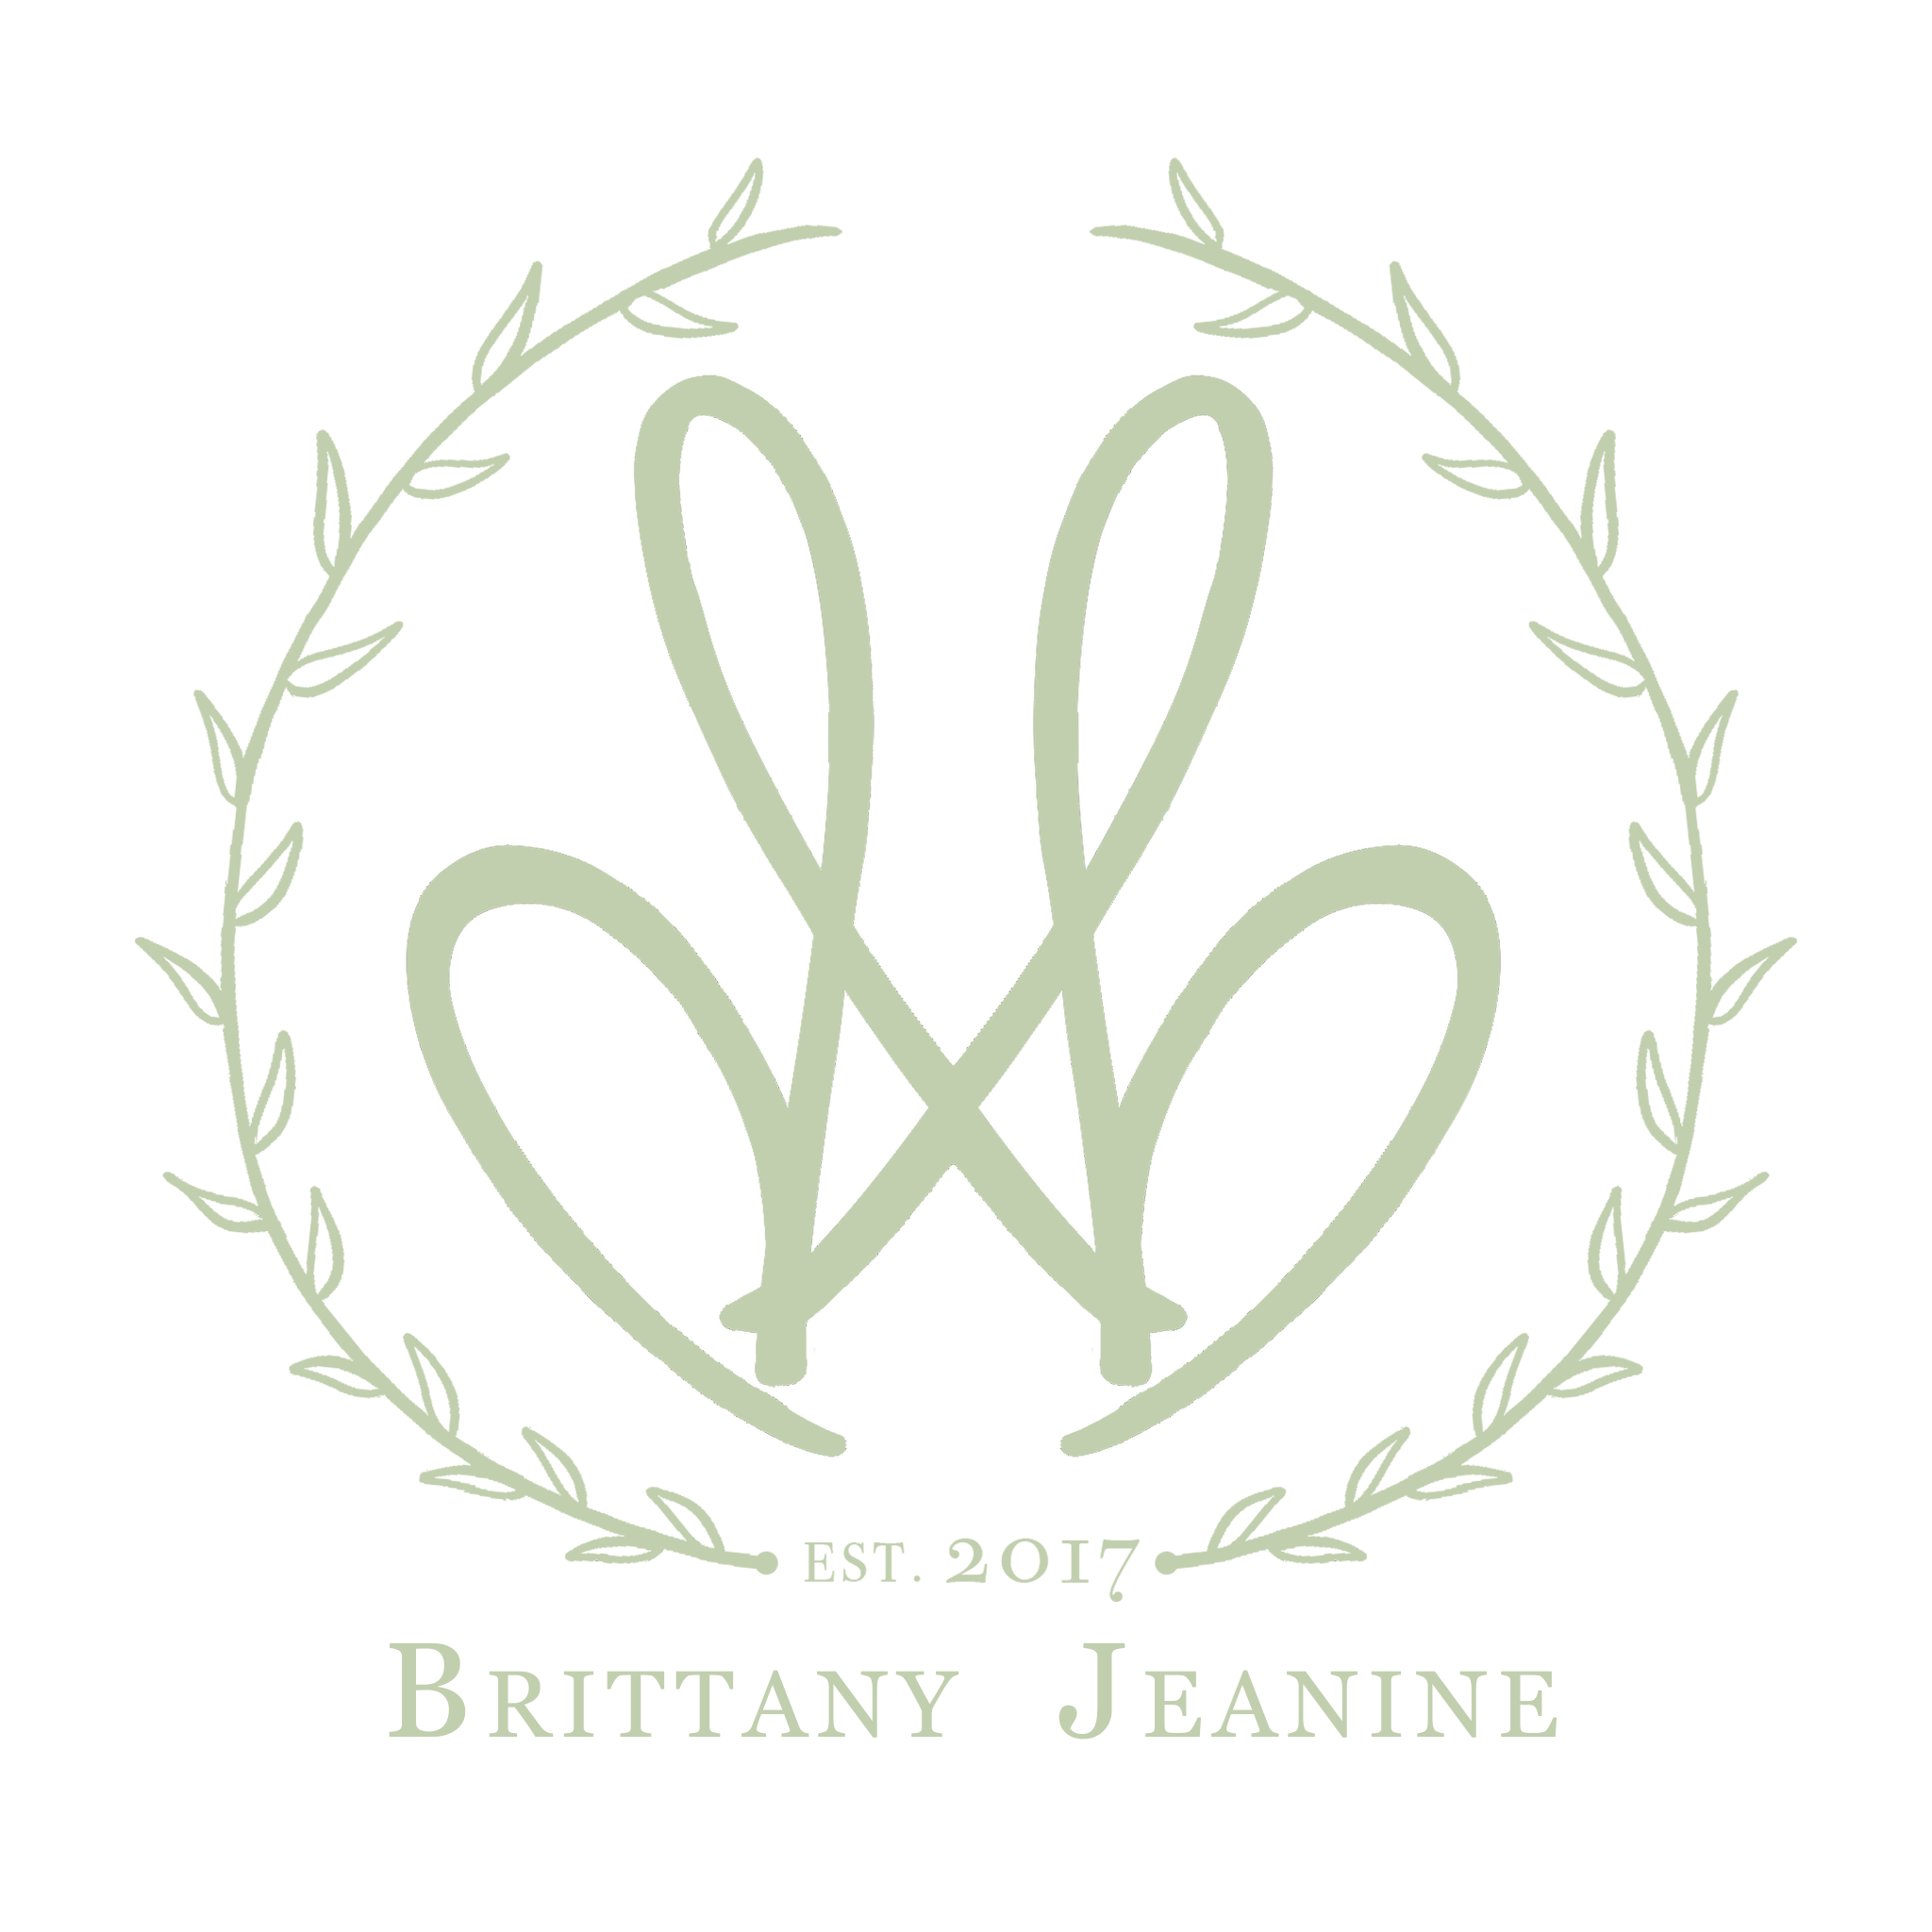 Brittany Jeanine